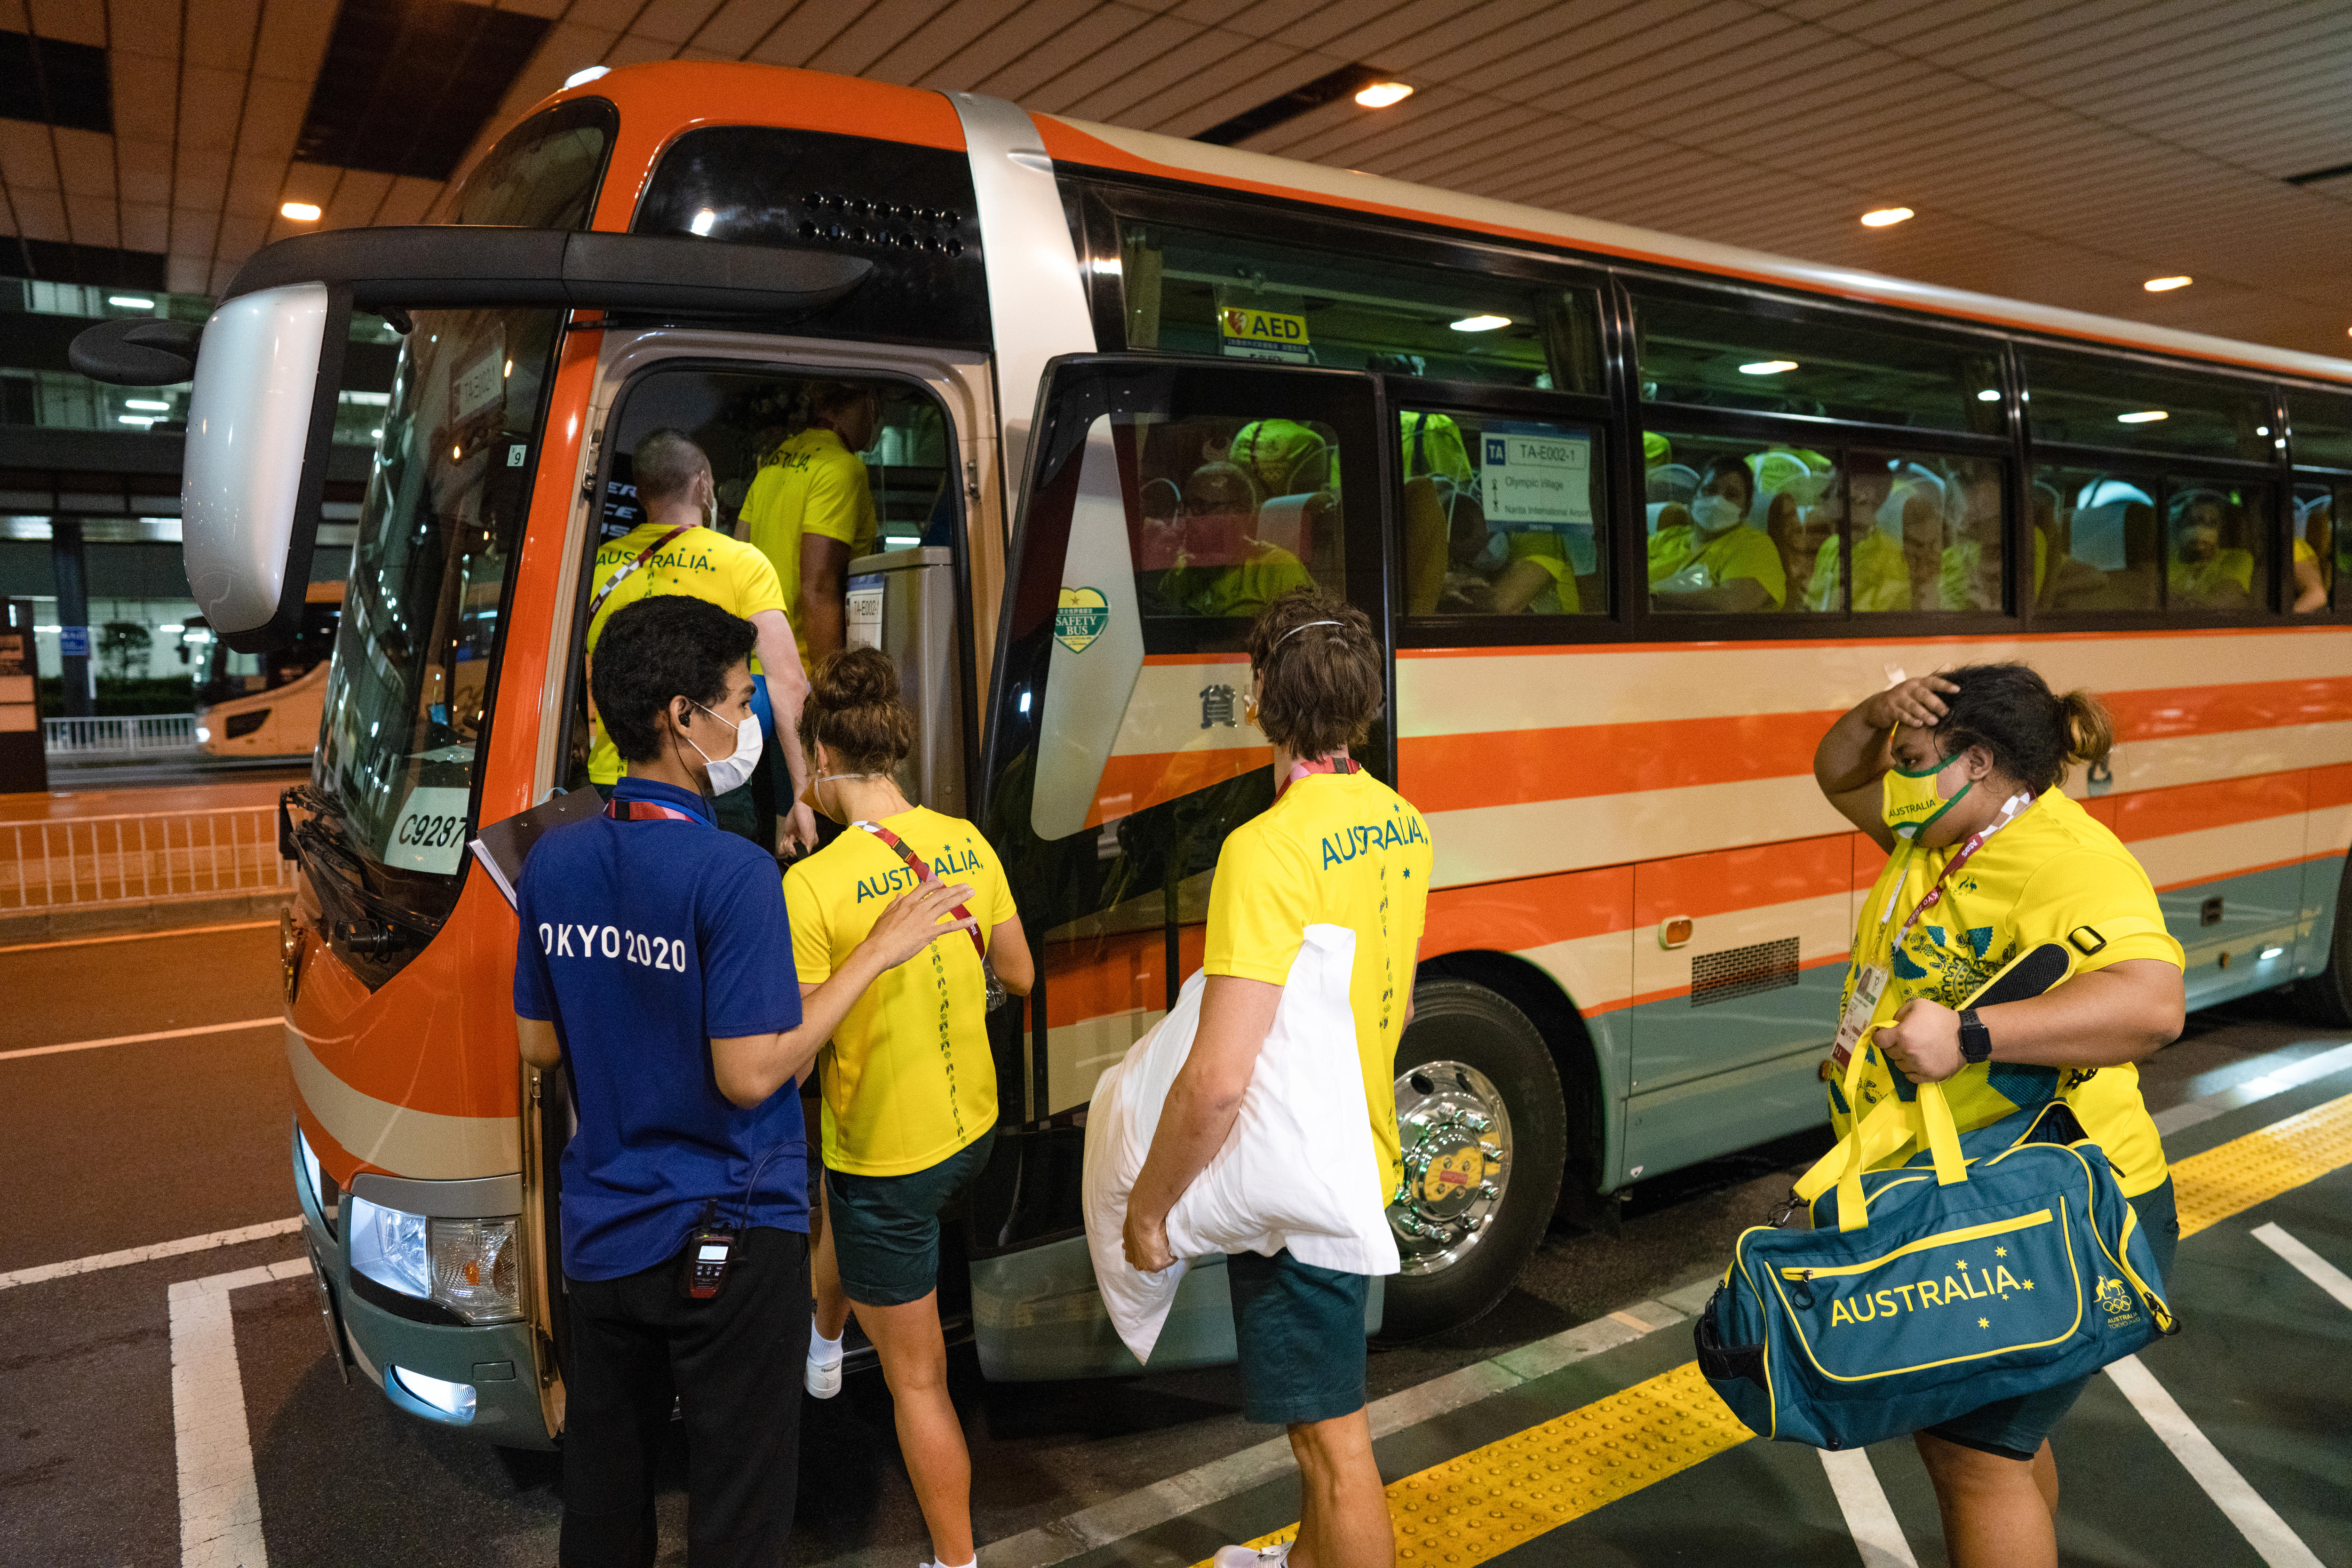 People in yellow jerseys and green shirts line up to board a bus 